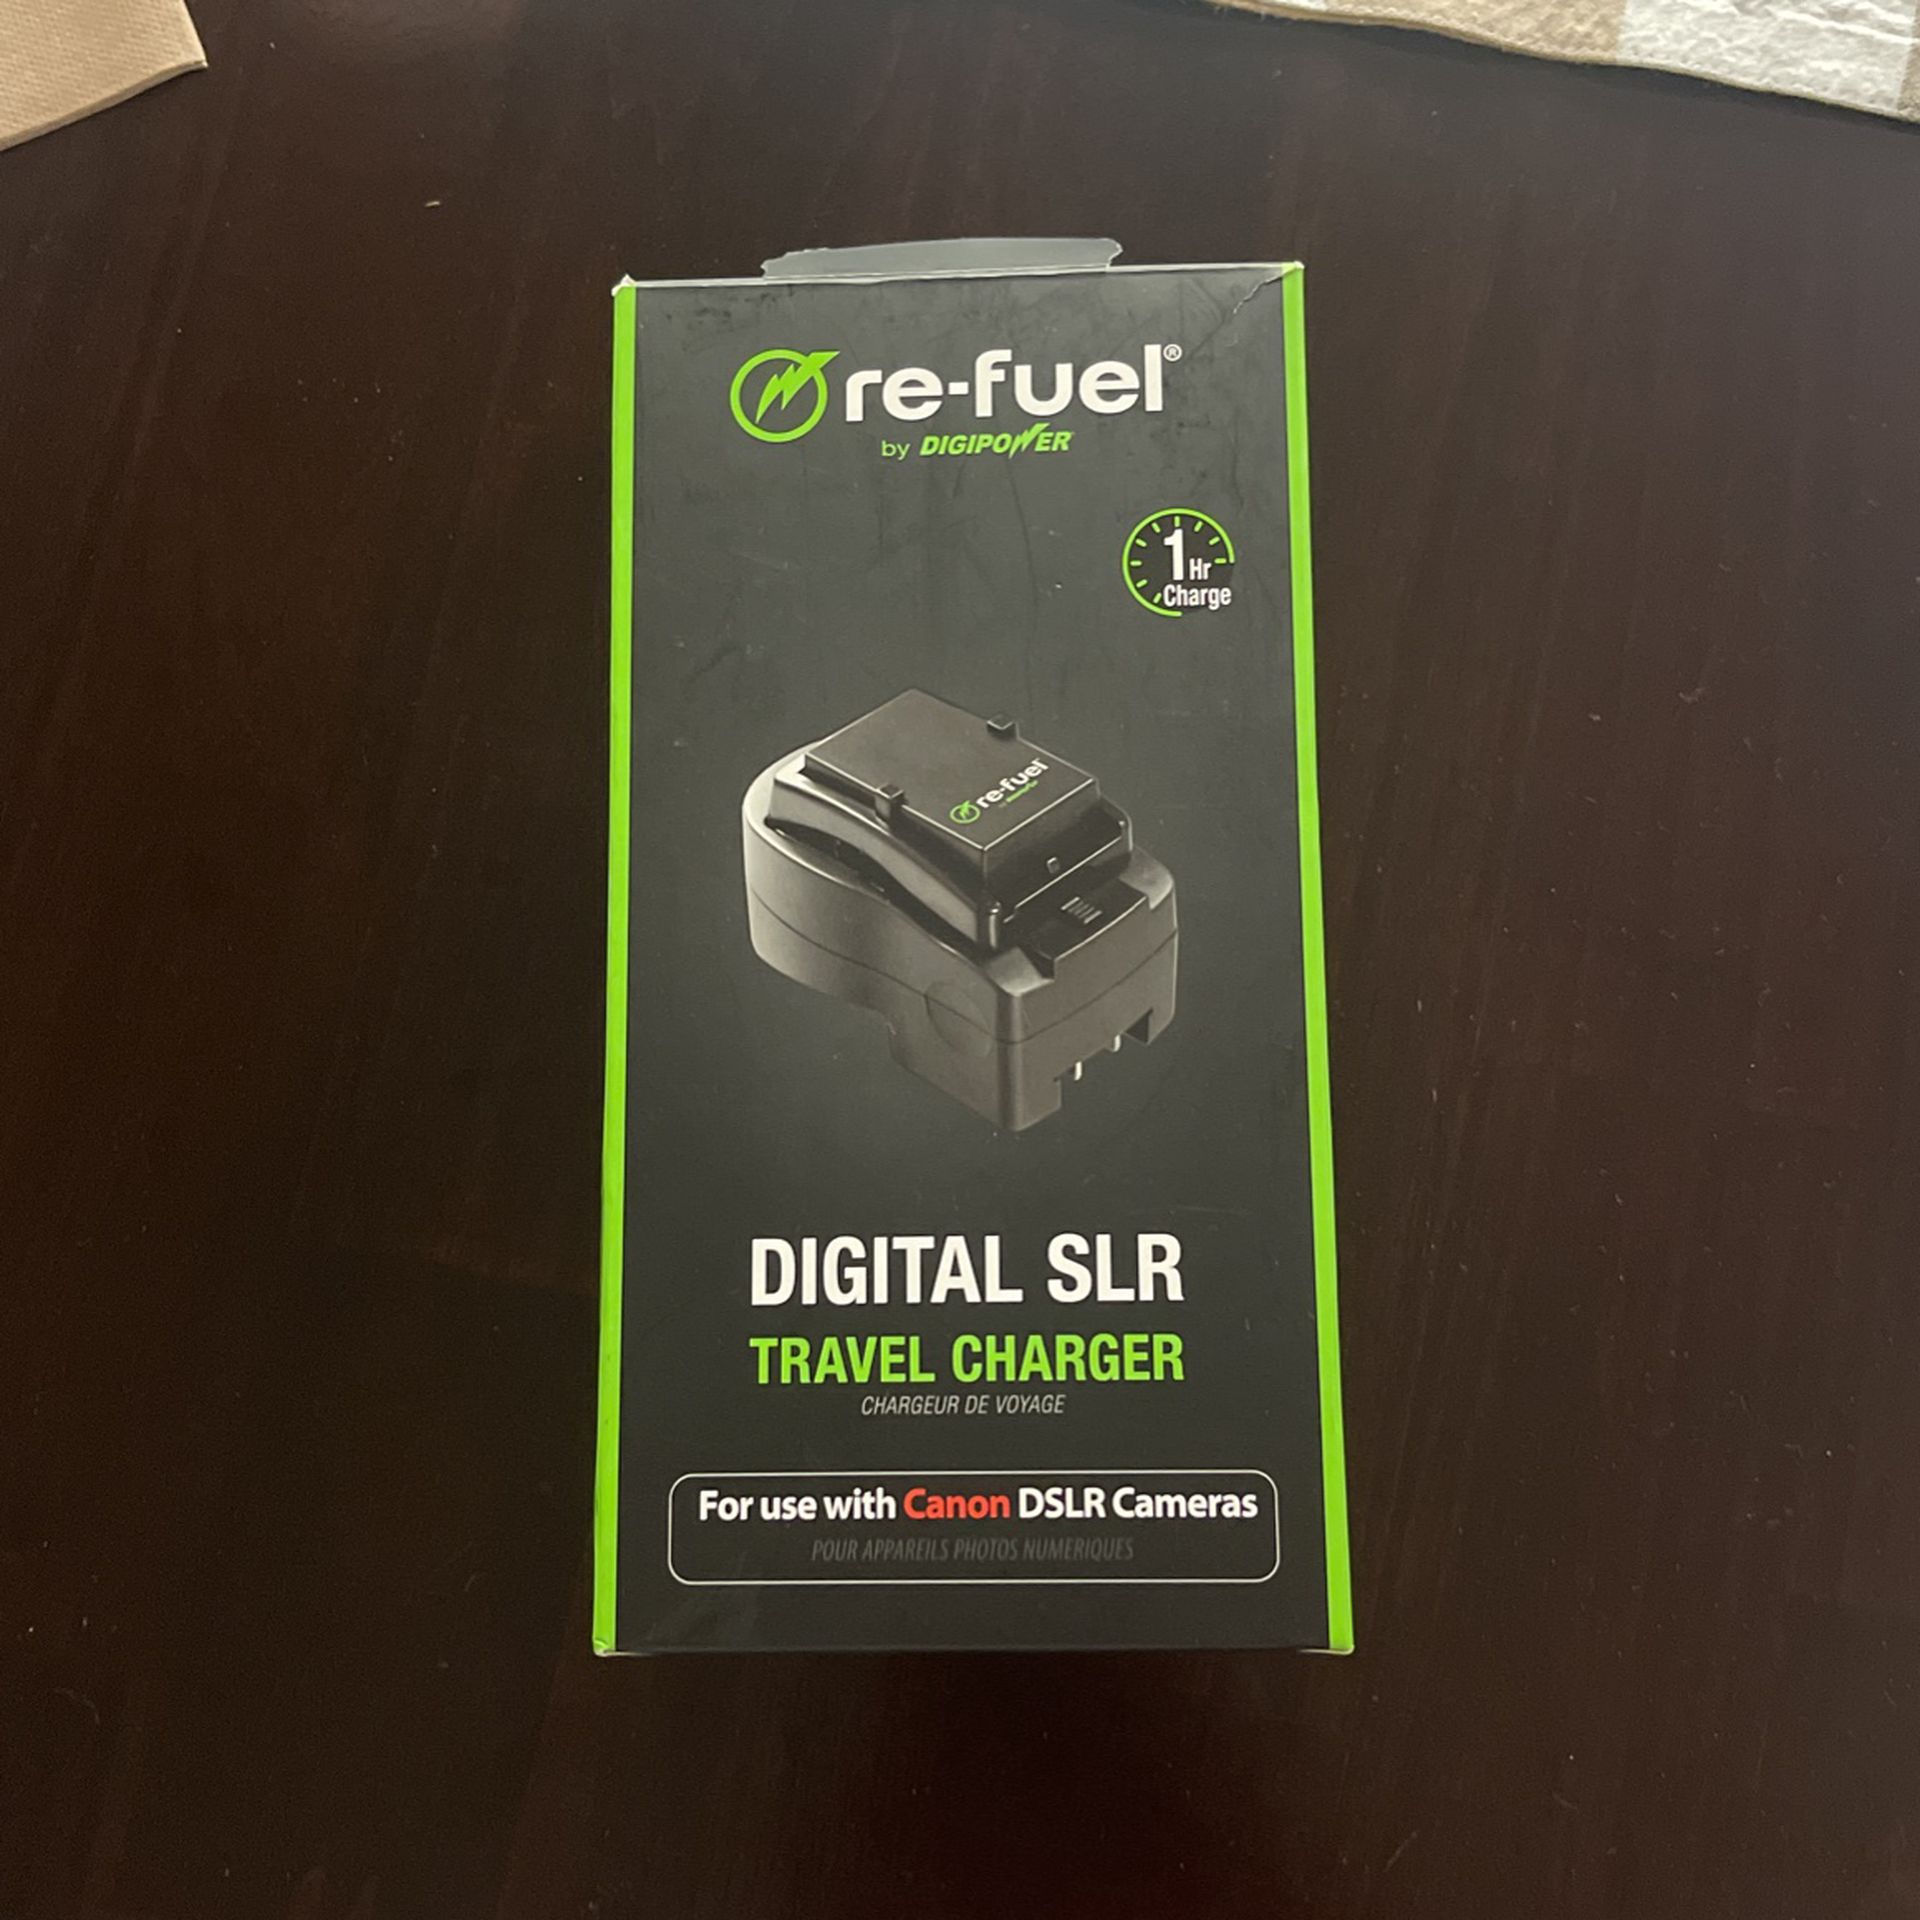 re-fuel by digipower digital slr travel changers canon dslr cameras